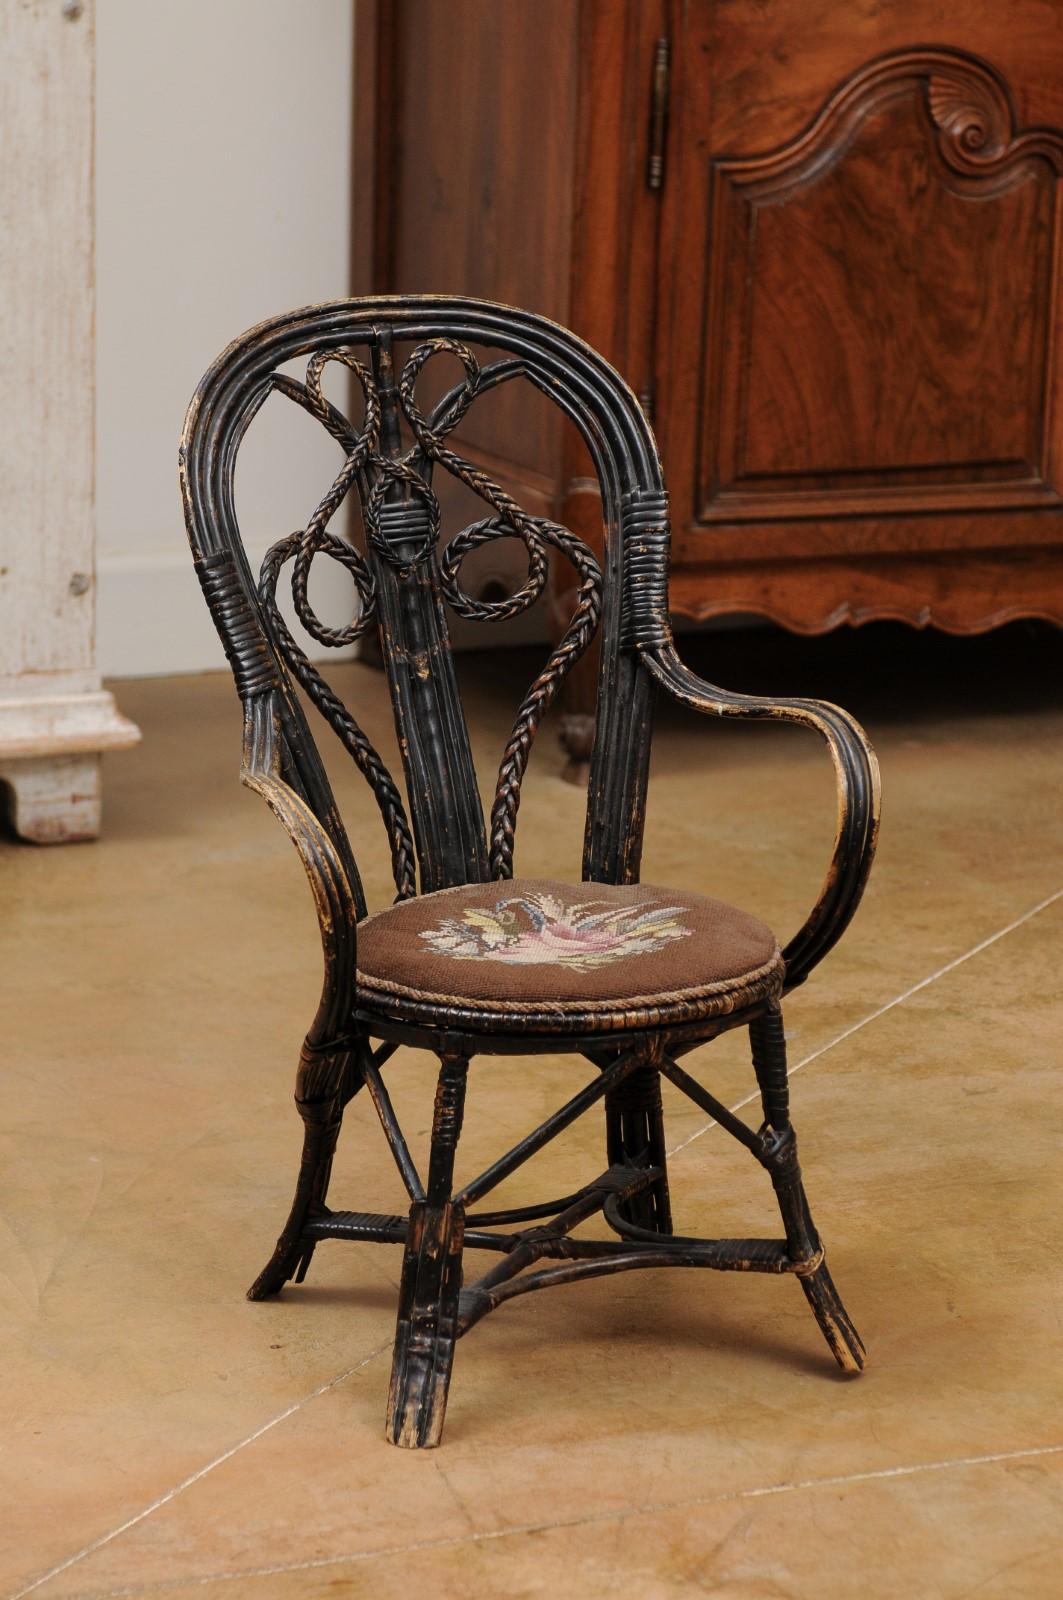 A French rattan child's chair from the 19th century, with needlepoint seat and weathered appearance. Created in France during the 19th century, this child's chair charms us with its simple lines and rustic appeal. The back, adorned with scrolling